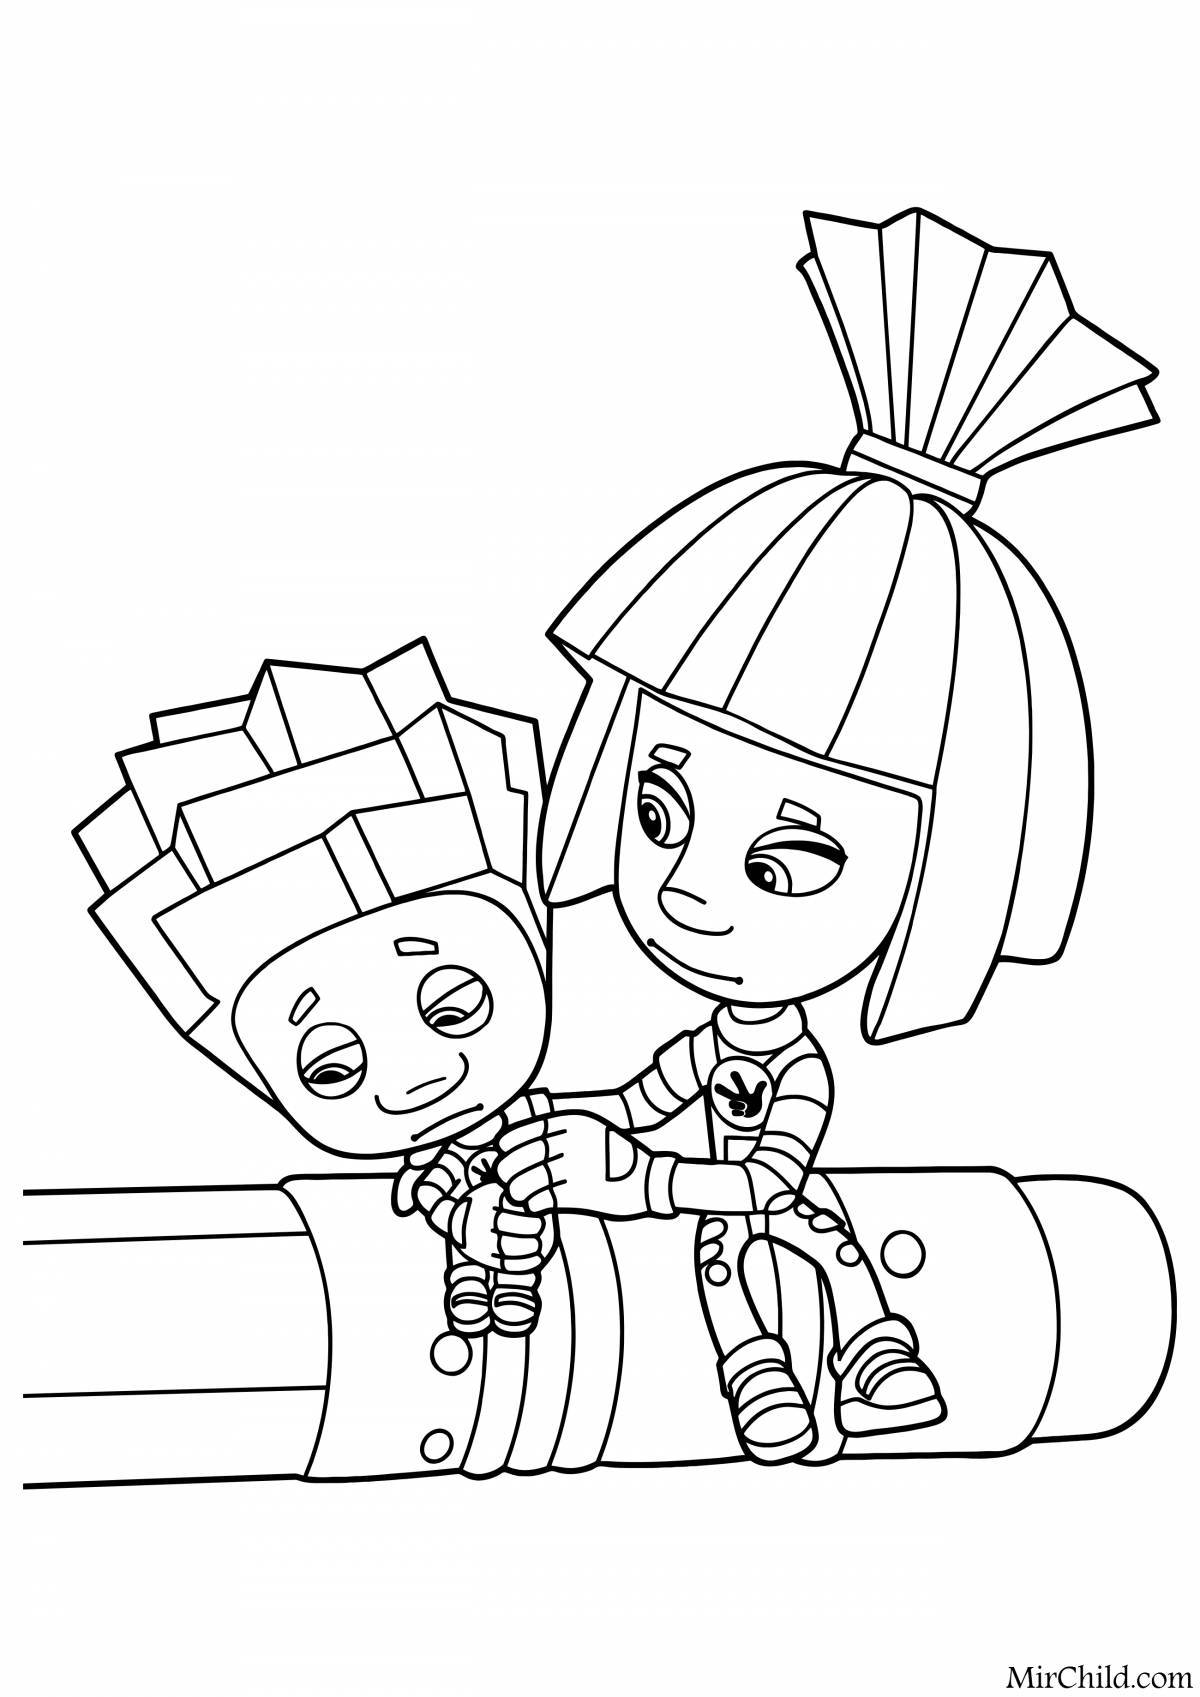 Cute fixies coloring pages for 3-4 year olds